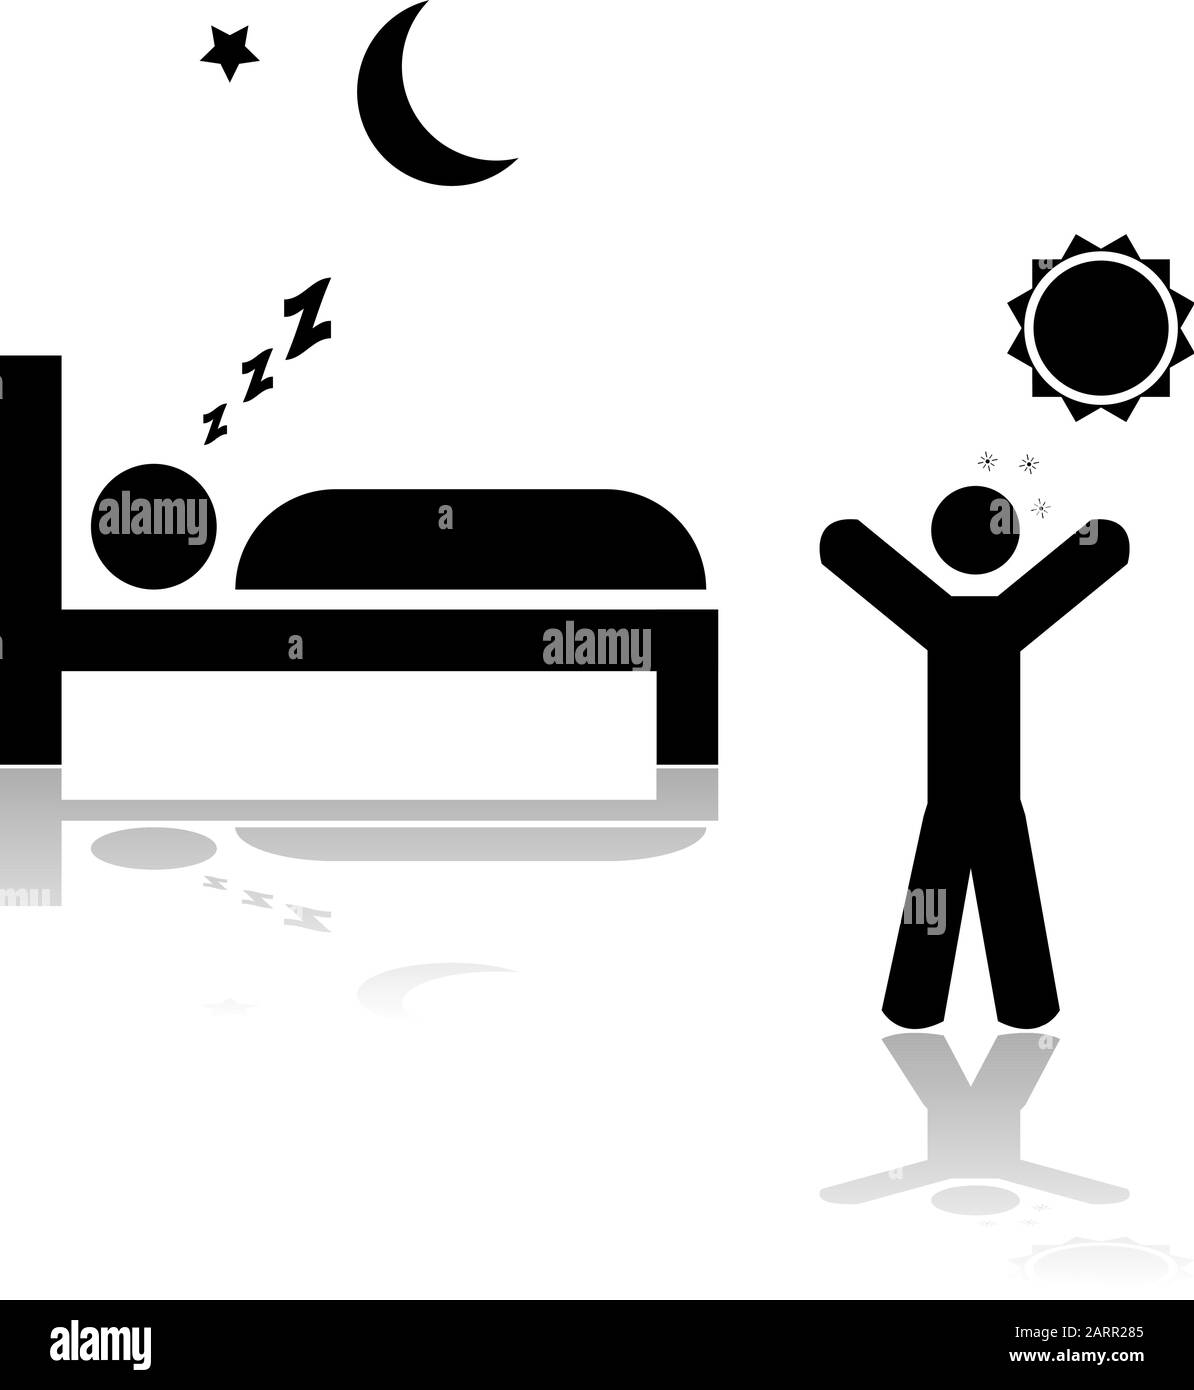 Icon illustration showing one person sleeping at night and another waking up during the day Stock Vector